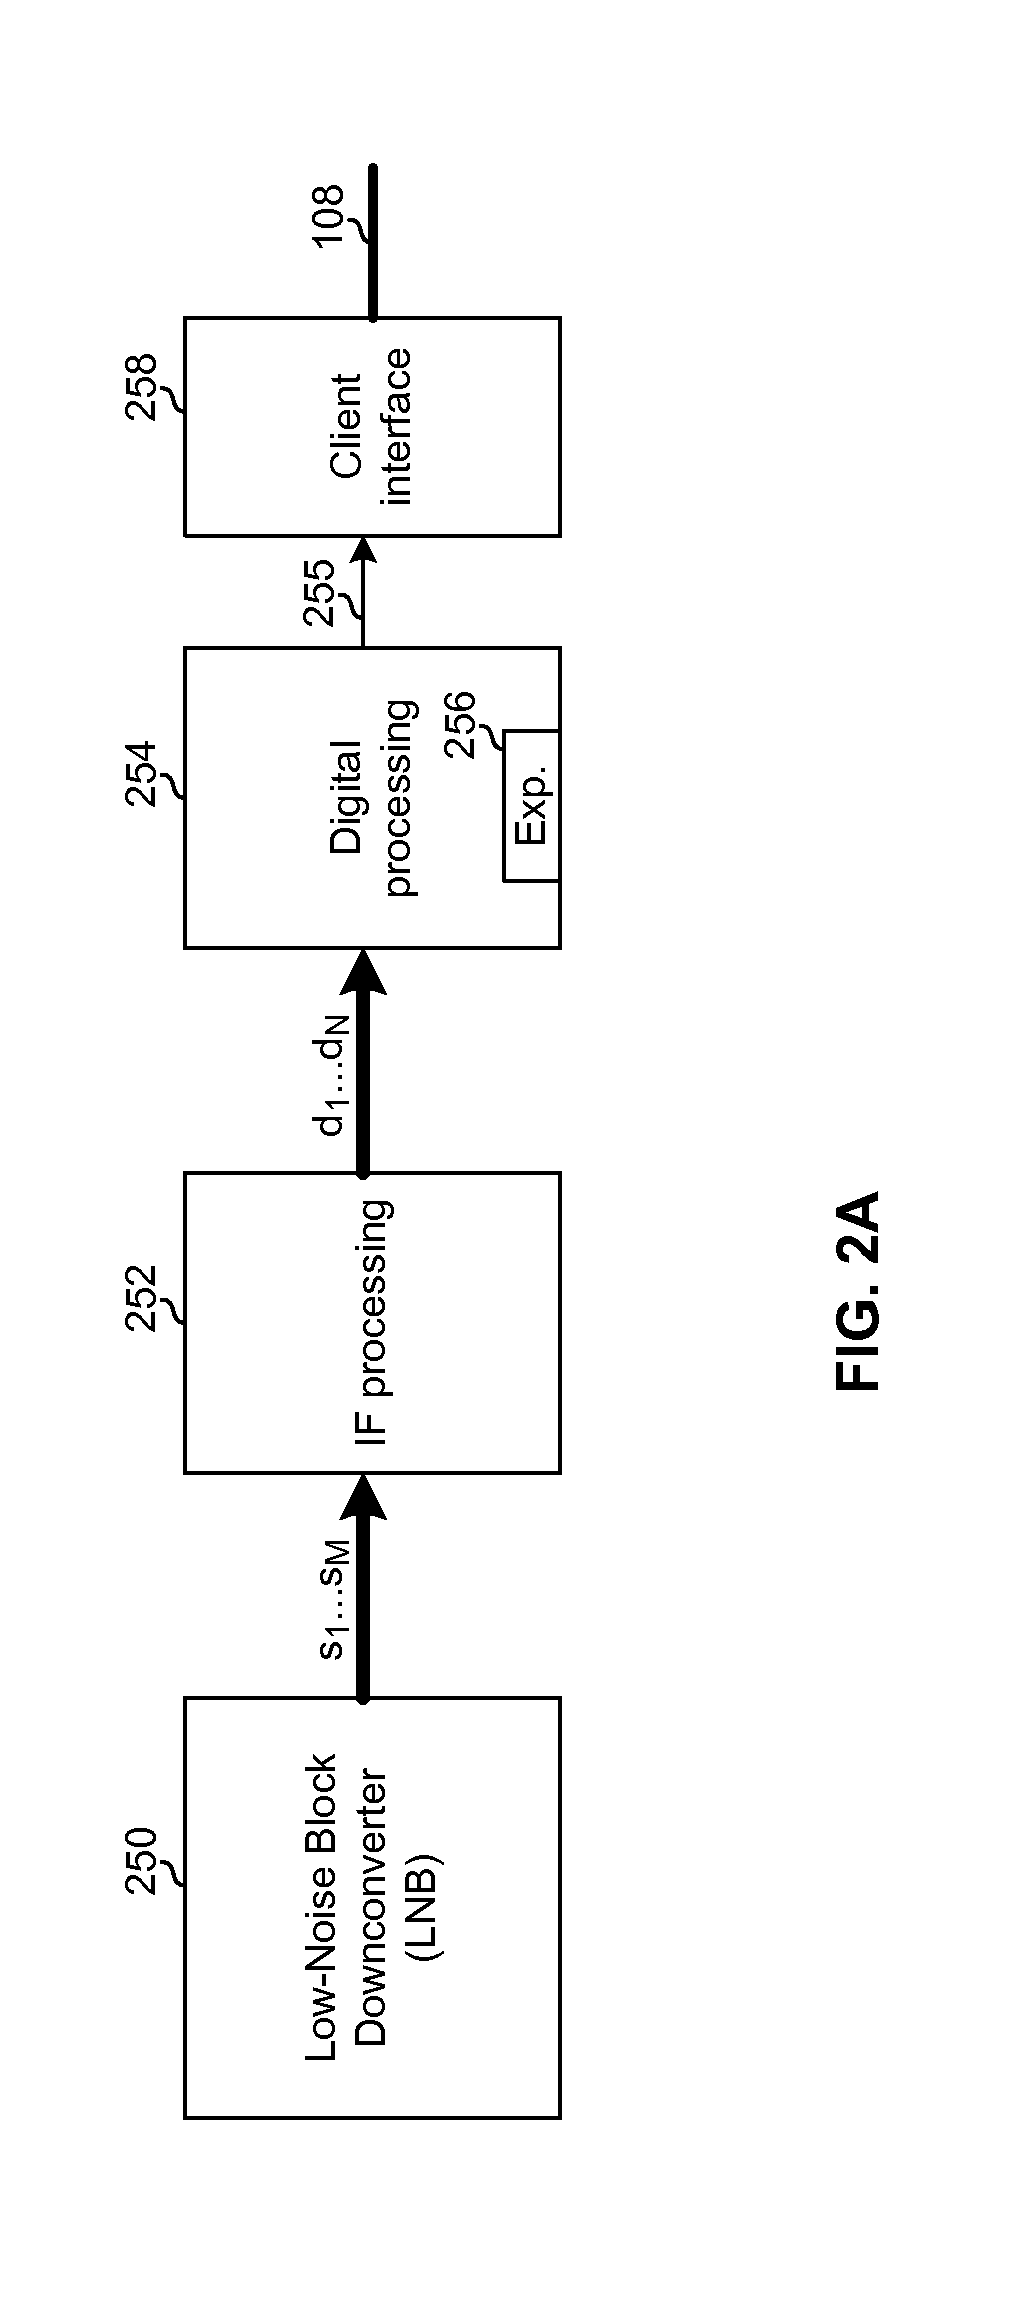 Modular, Expandable System for Data Reception and Distribution